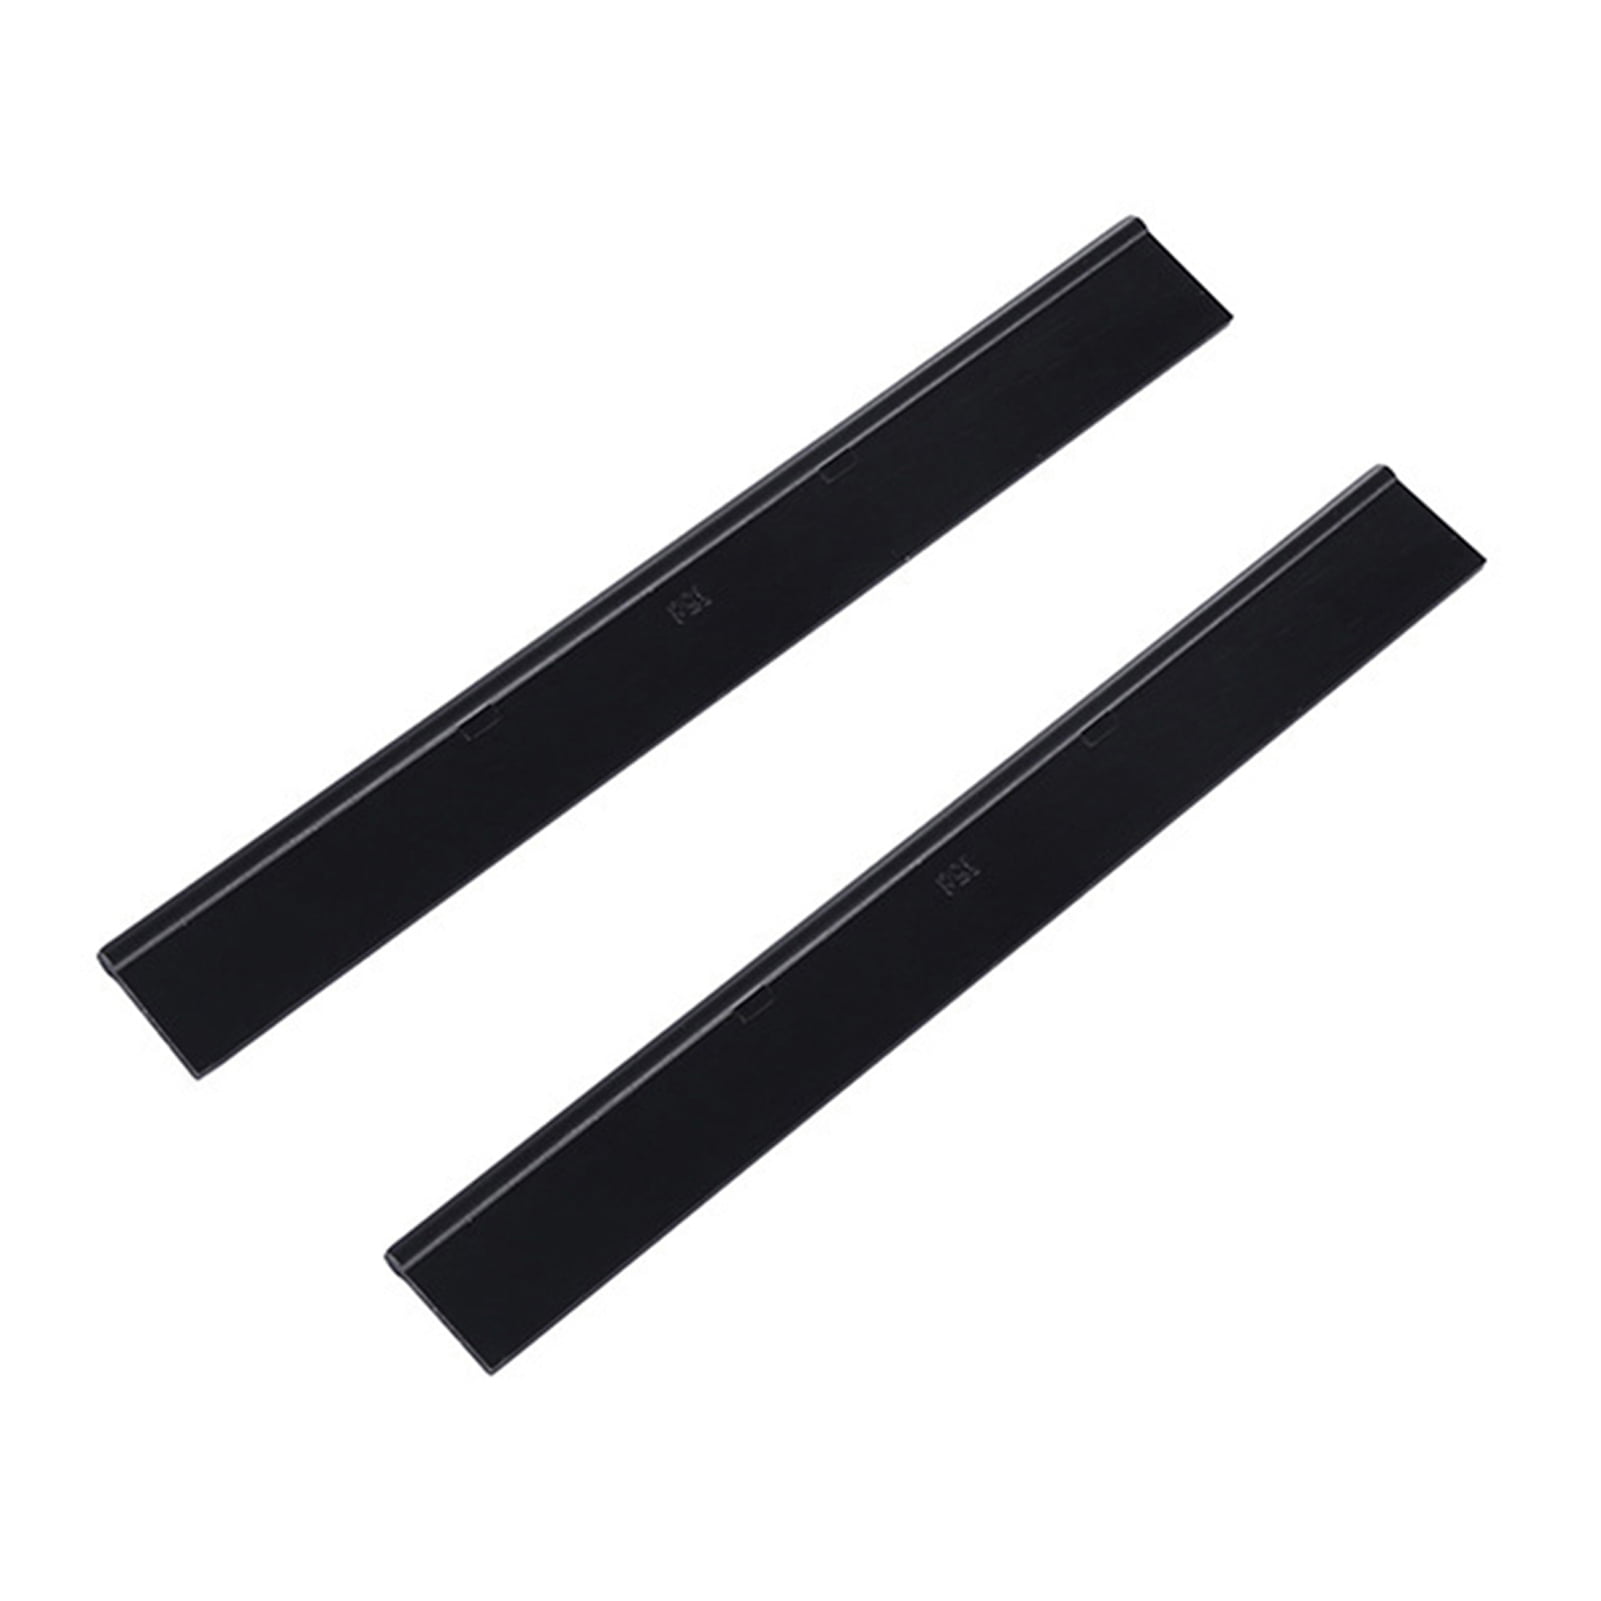 Replacement Window Cleaner Rubber Strips Squeegee Blades for Karcher WV1 WV2 WV5